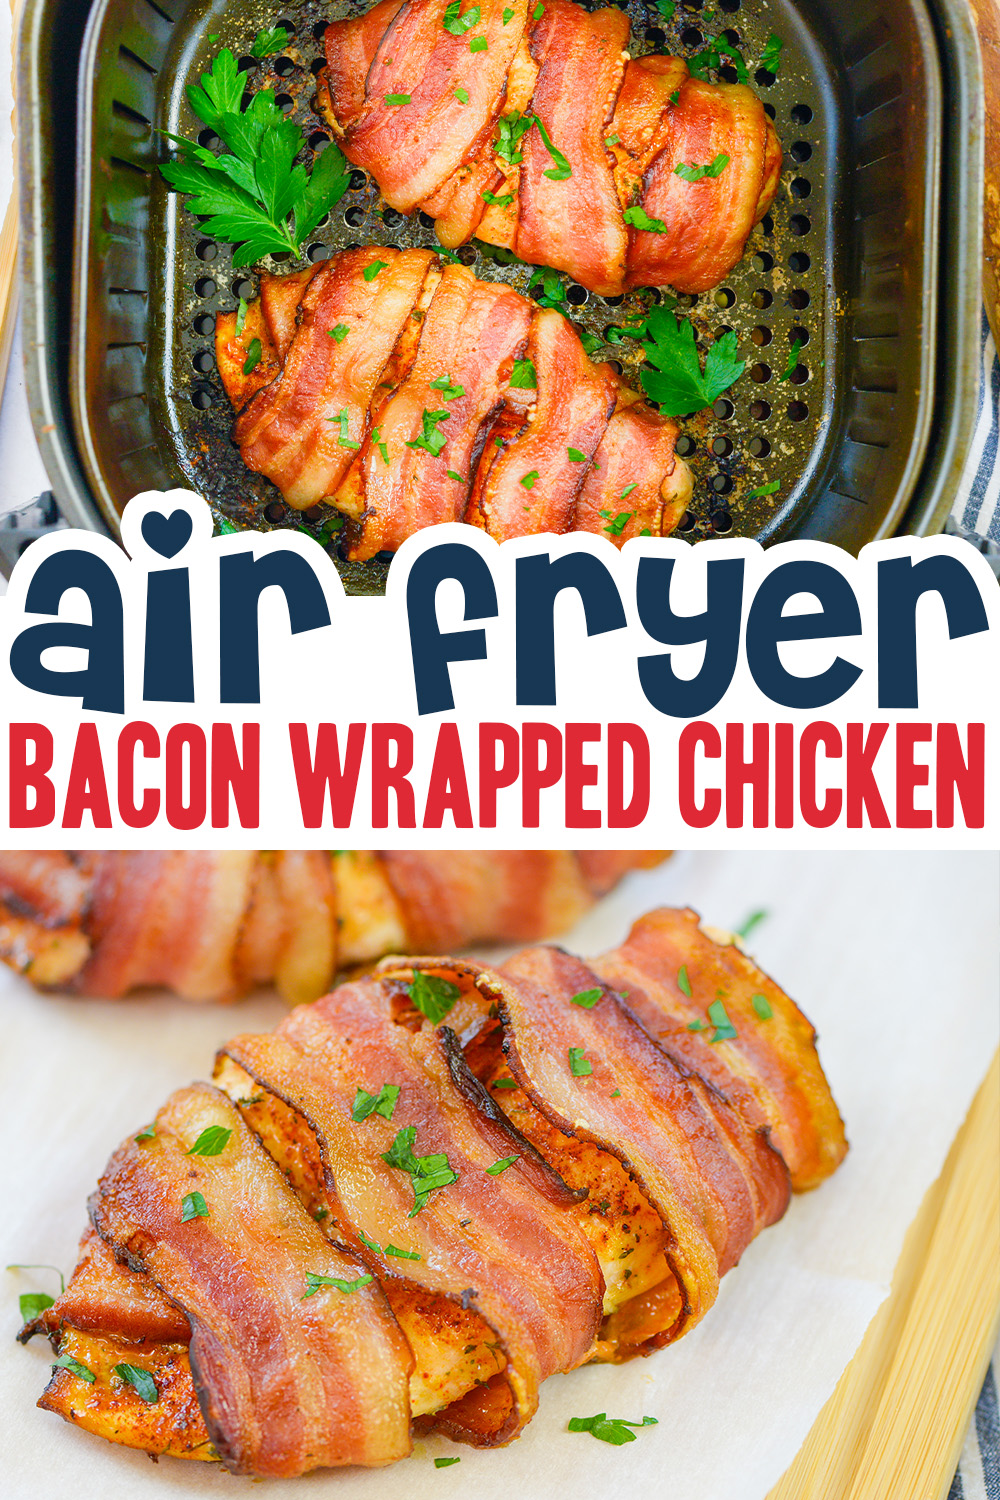 This bacon wrapped chicken uses the air fryer for the absolute best texture and flavor combination!